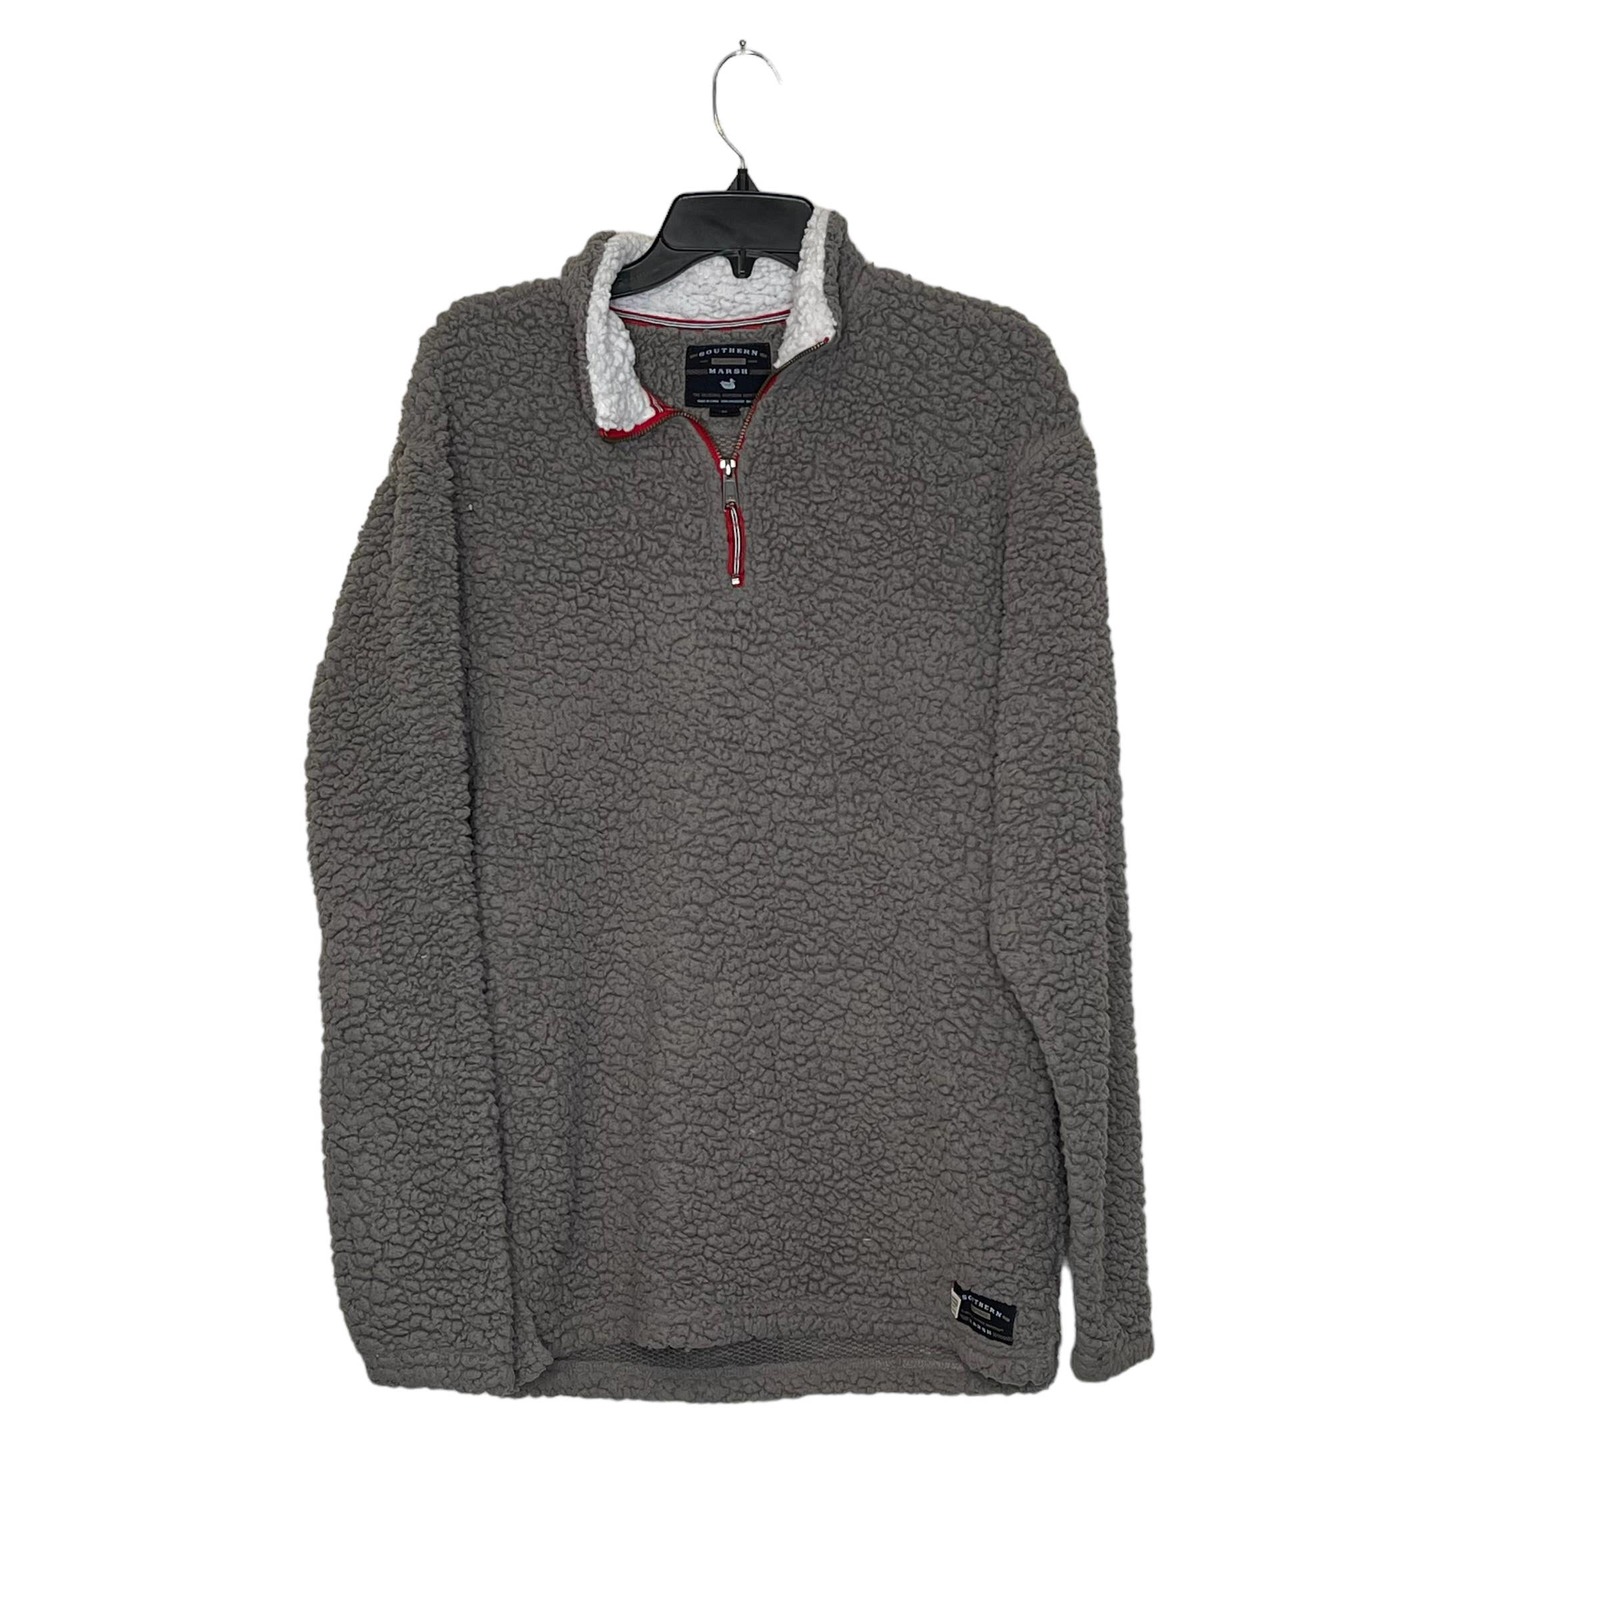 Primary image for Southern Marsh 1/4 Zip Pullover - Size Medium - Gray Sherpa - Men's Outdoor